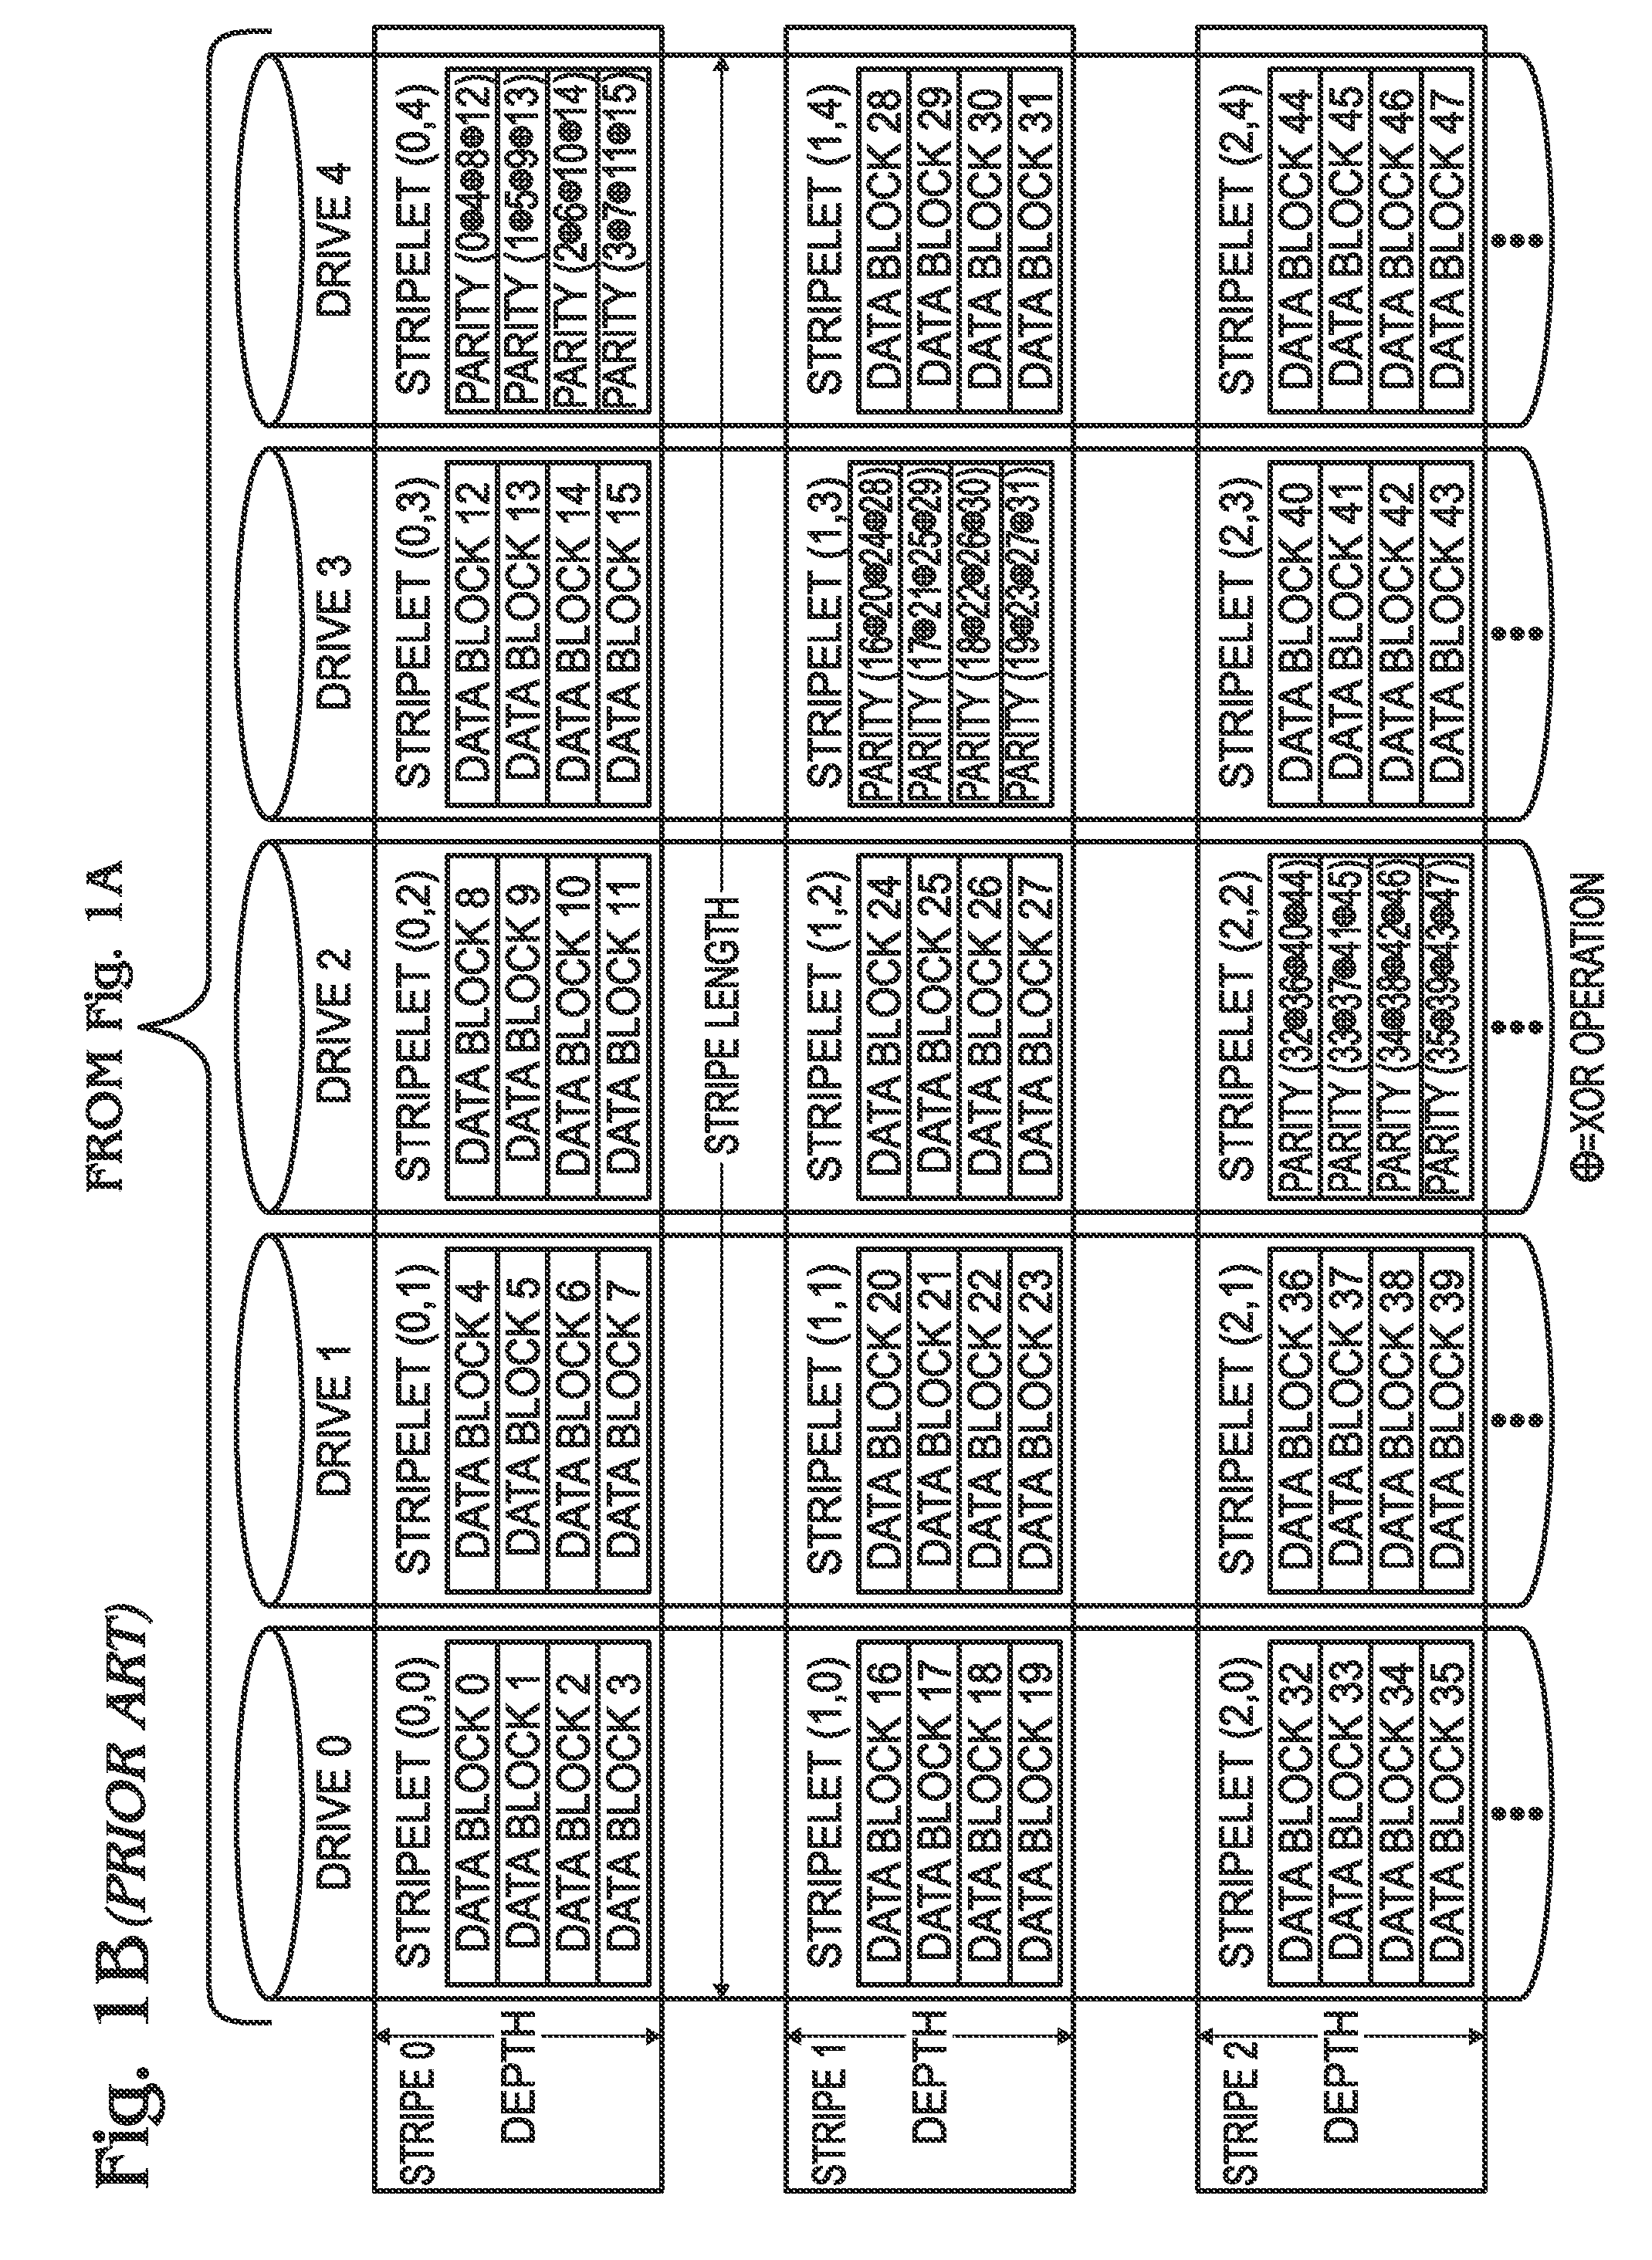 Automated Full Stripe Operations in a Redundant Array of Disk Drives